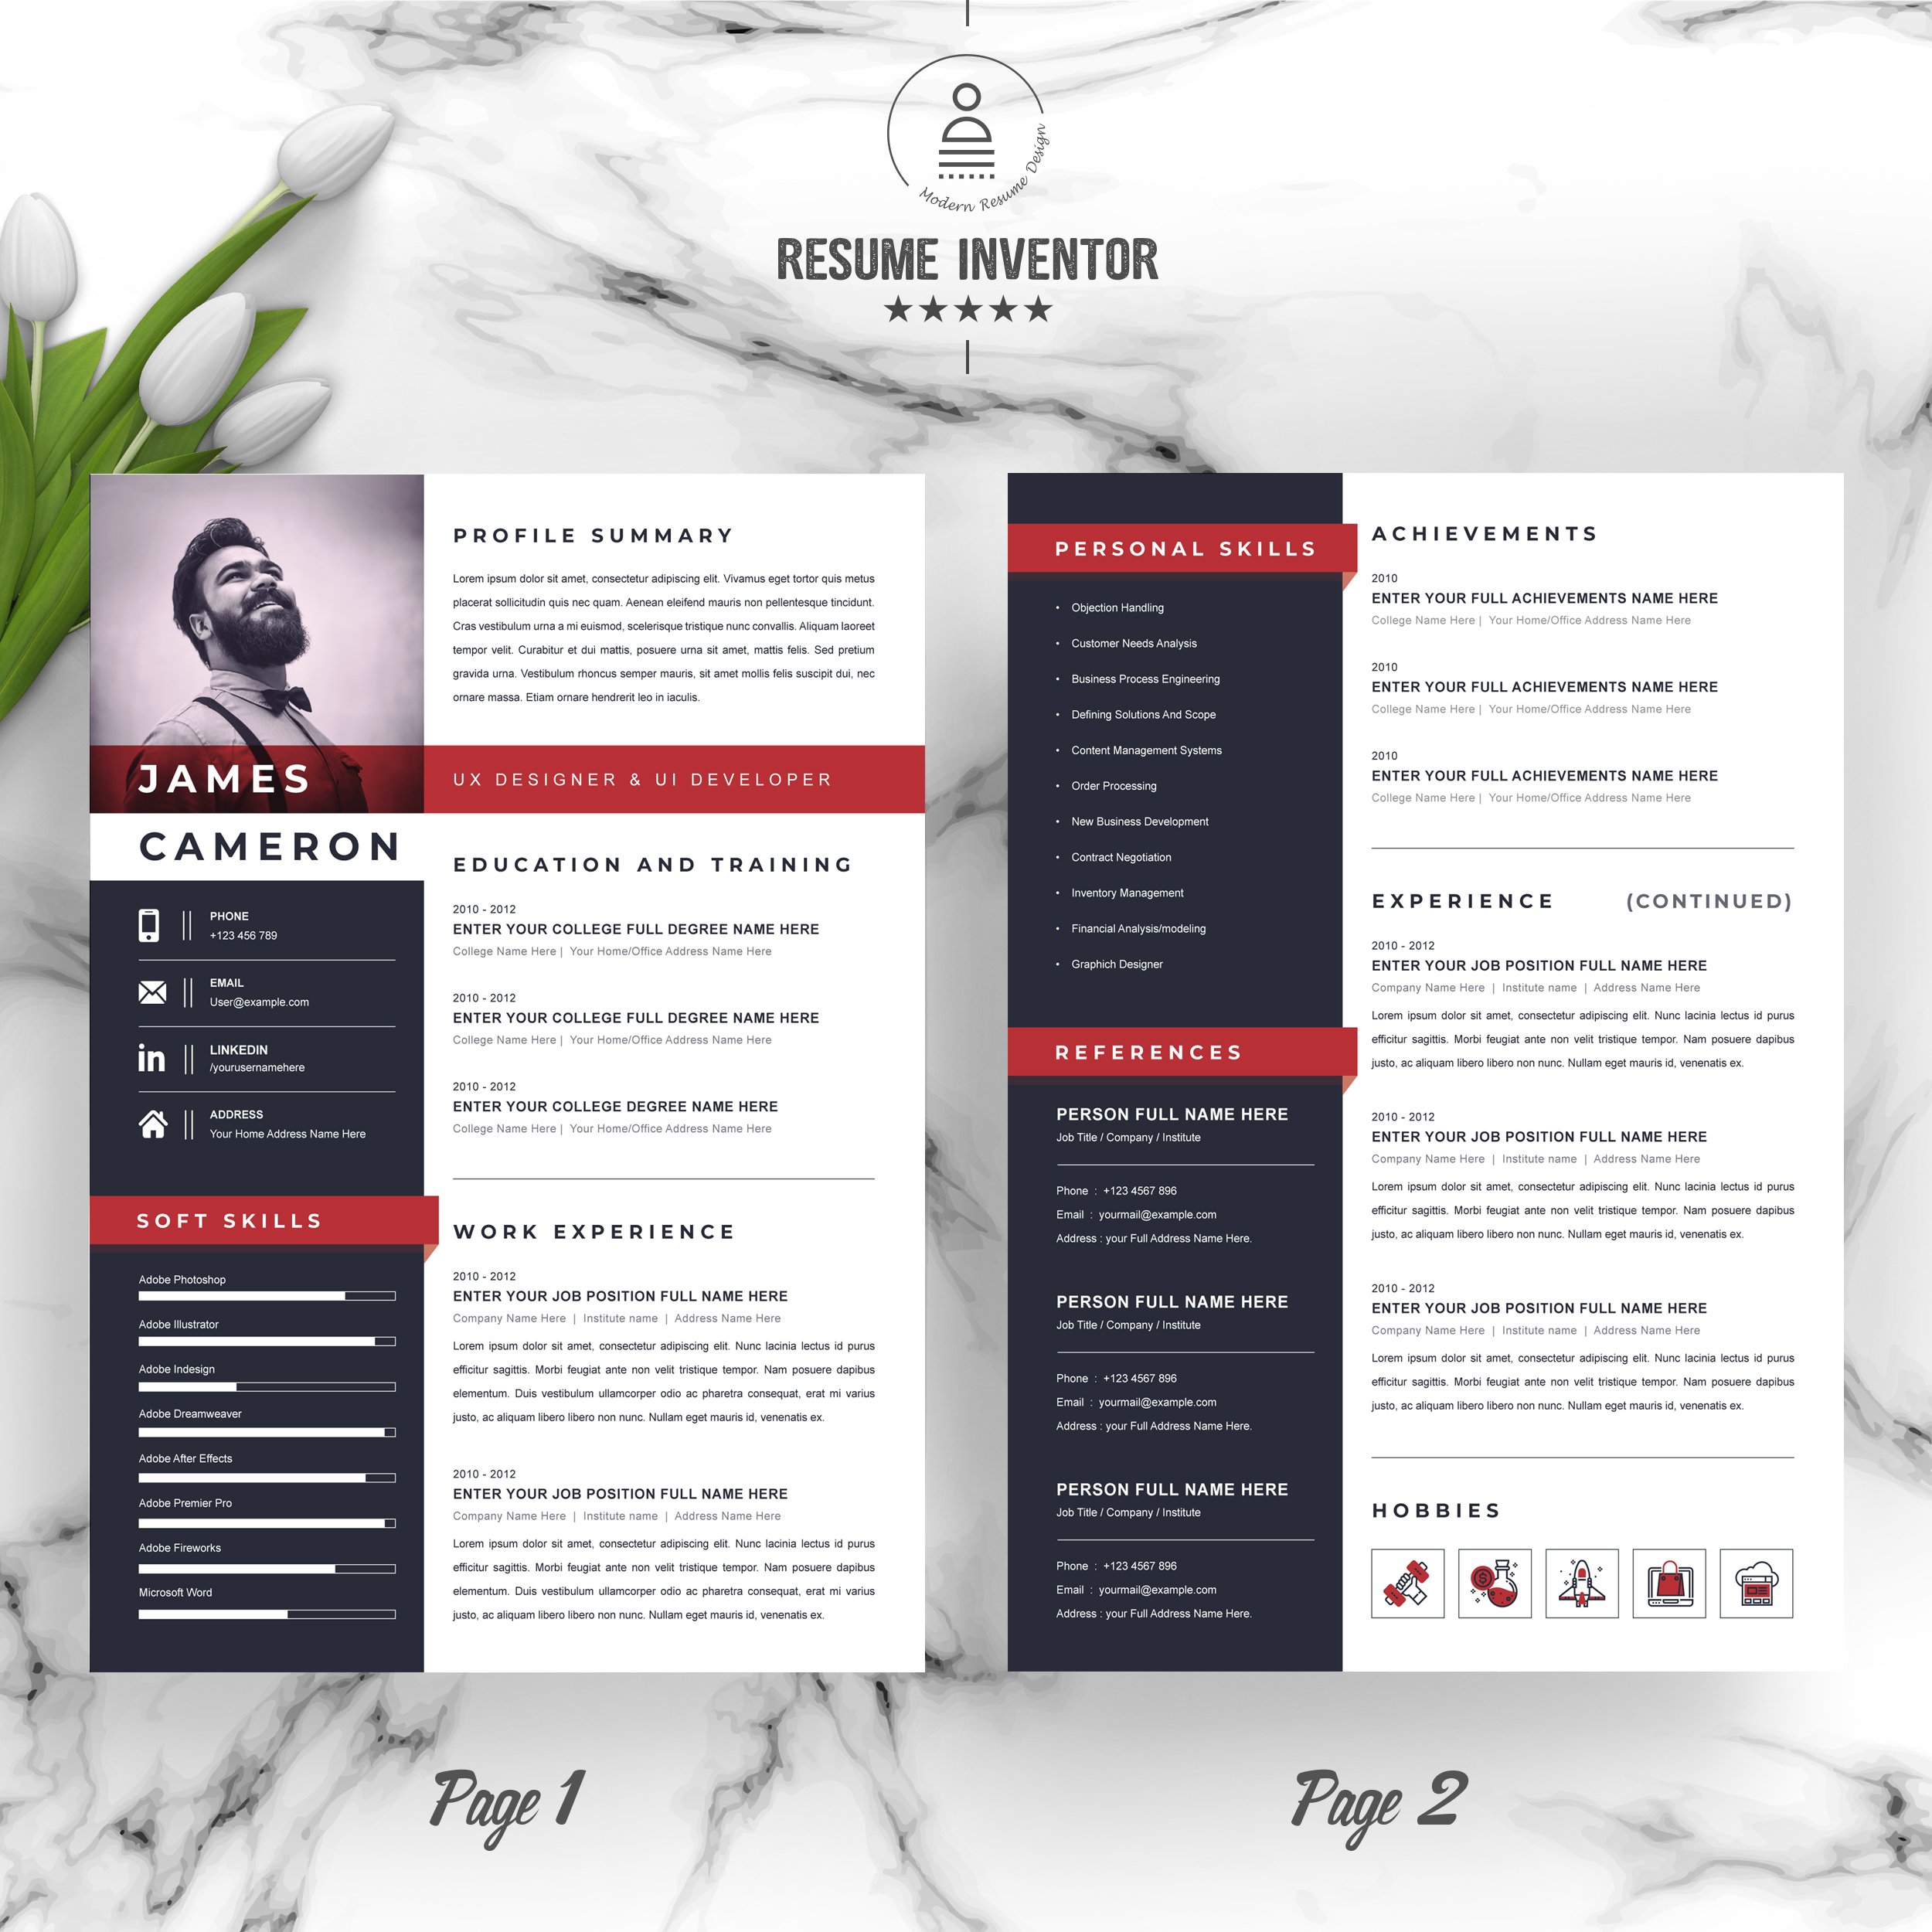 Resume/CV Design Template | MS Word preview image.